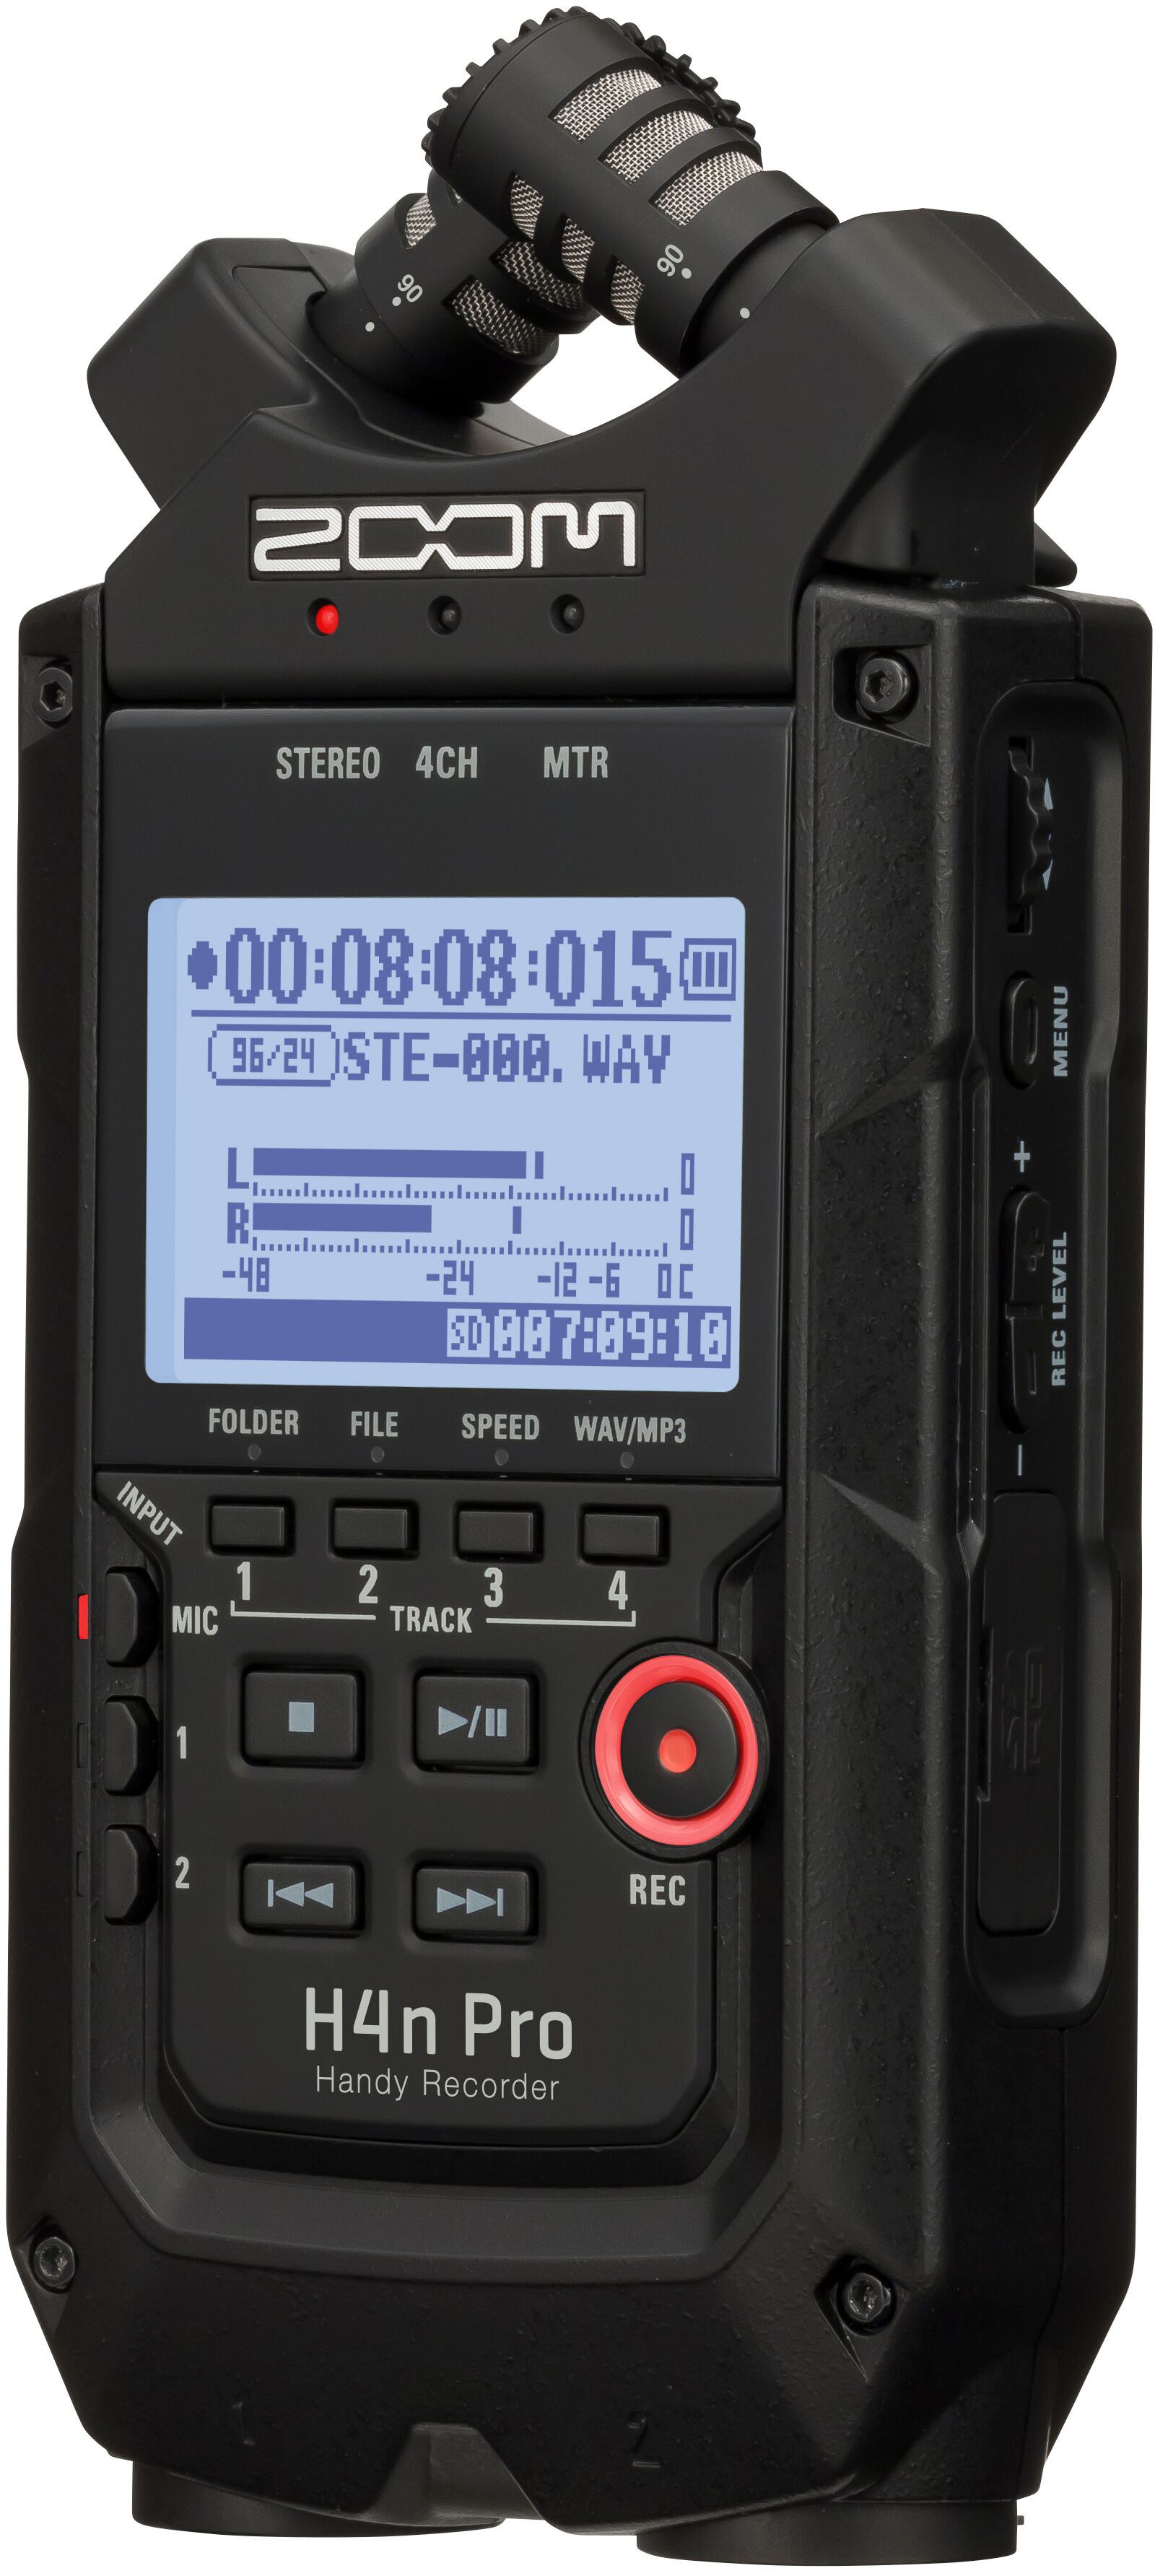 Zoom H4n Pro is more than simply an audio recorder